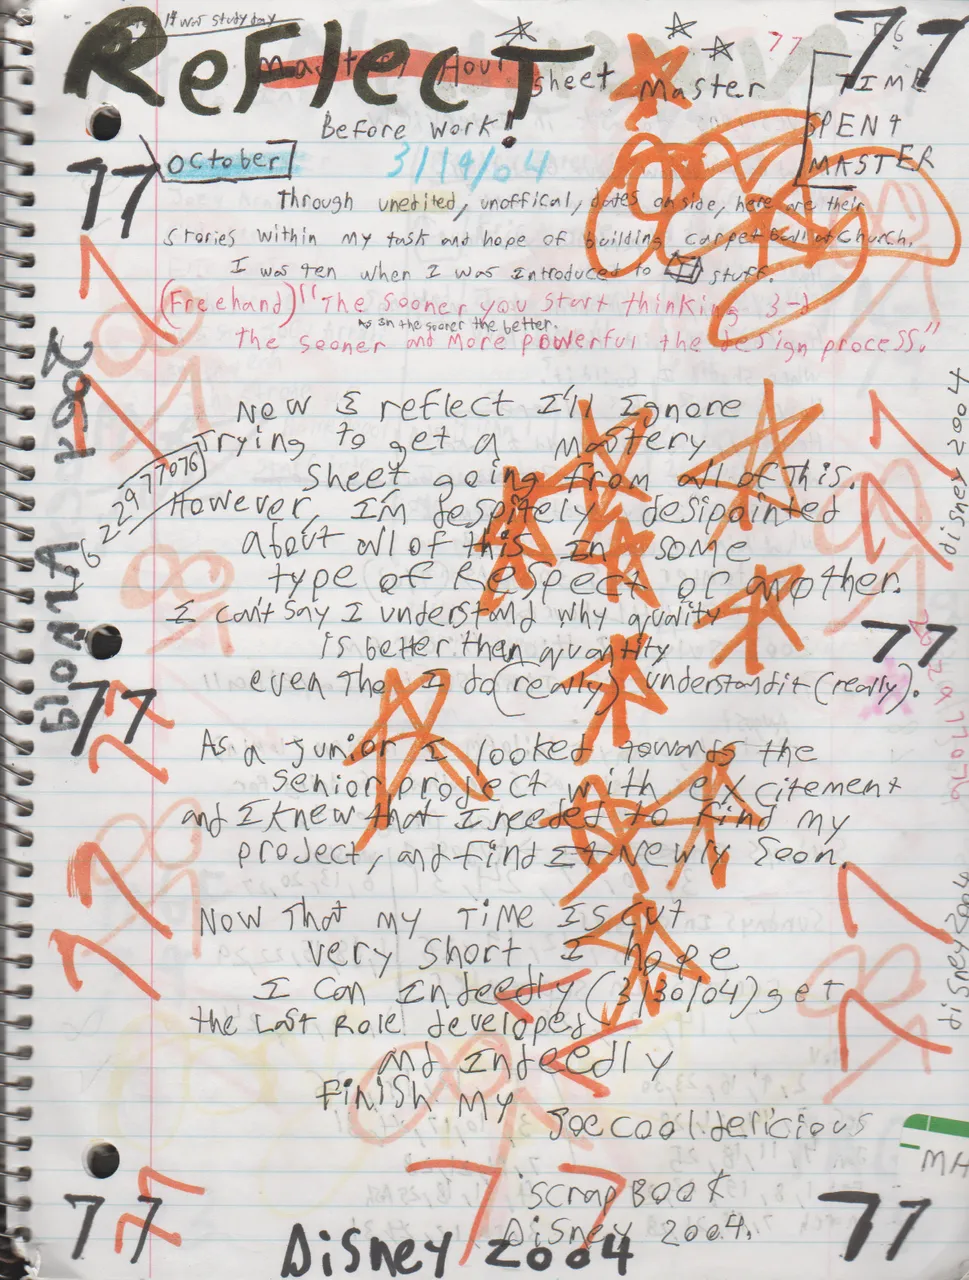 2004-01-29 - Thursday - Carpetball FGHS Senior Project Journal, Joey Arnold, Part 02, 96pages numbered, Notebook-75.png